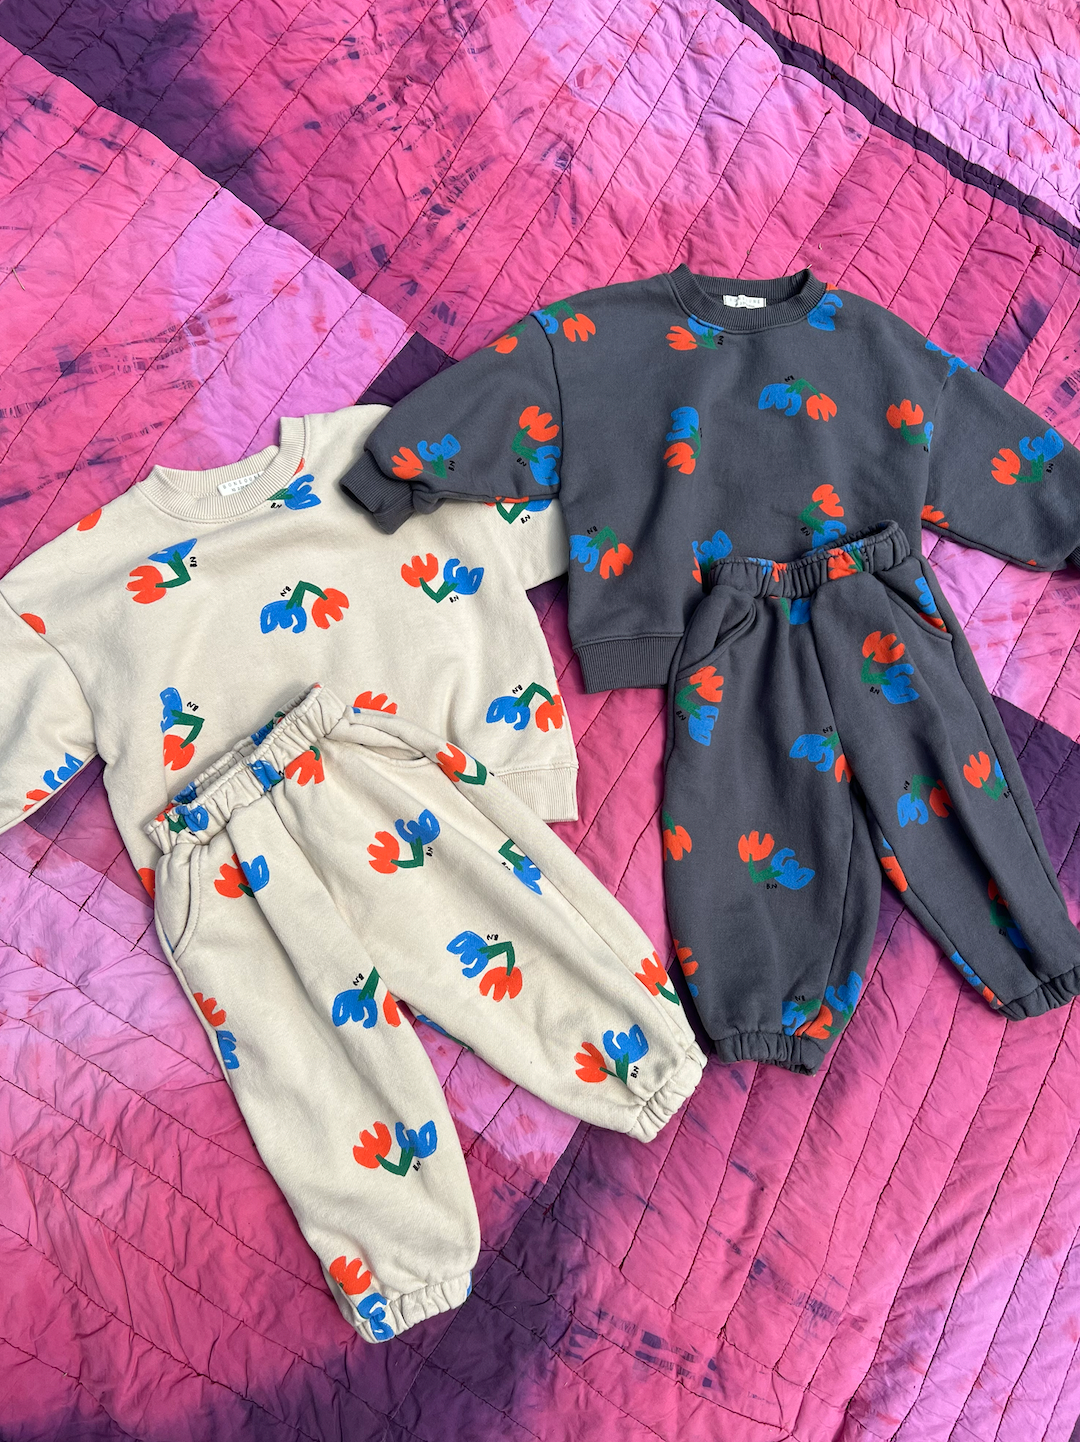 Two pairs of kids' sweatpants and tops laid on a quilt. One pair with blue and red flowers on an ecru background, one pair with blue and orange flowers on a slate gray background